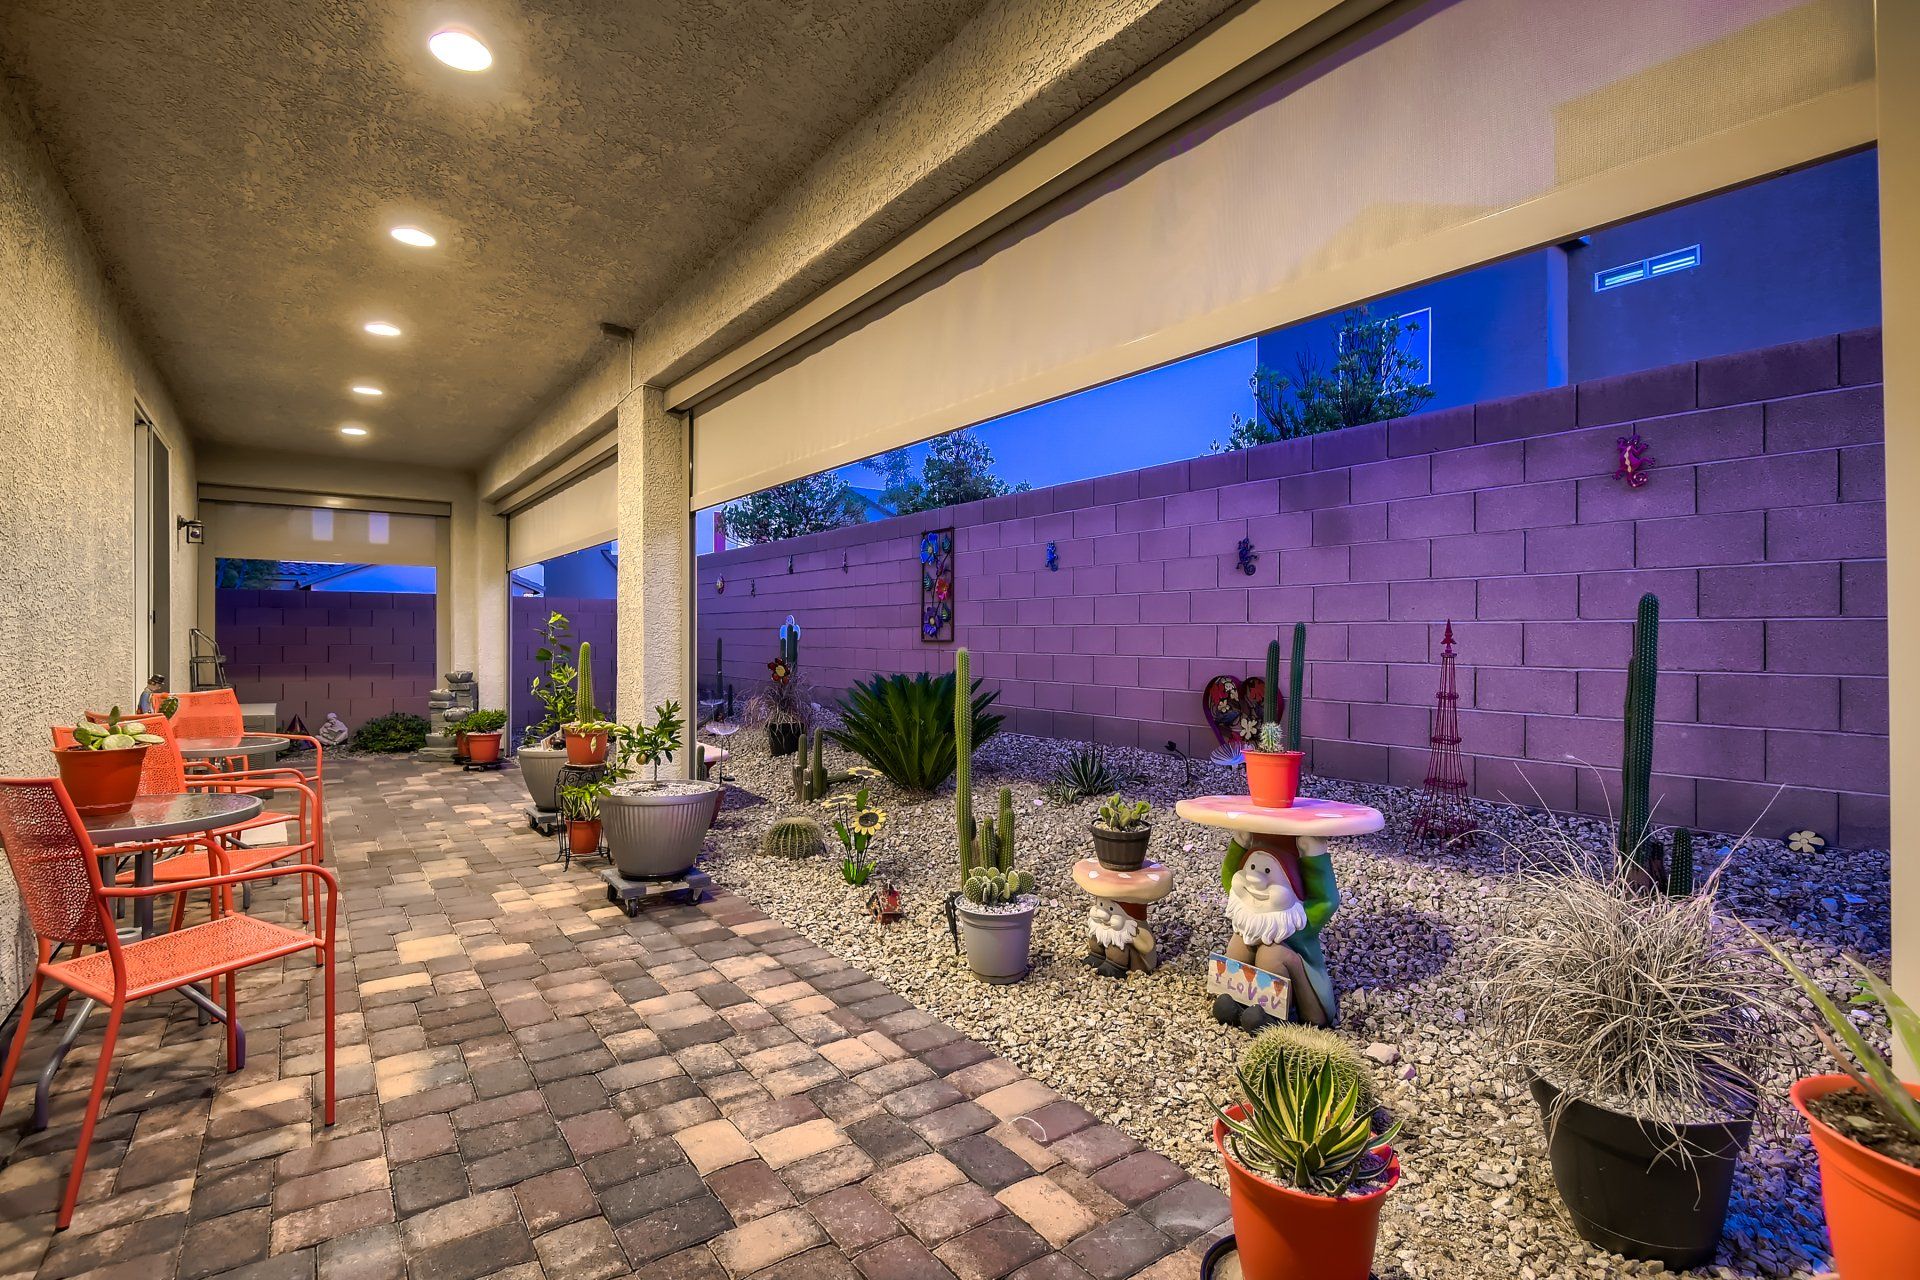 Backyard Patio Garden of a Las Vegas Home Purchased with a Conventional Home Loan offered by PIF Lending which is a mortgage broker near me